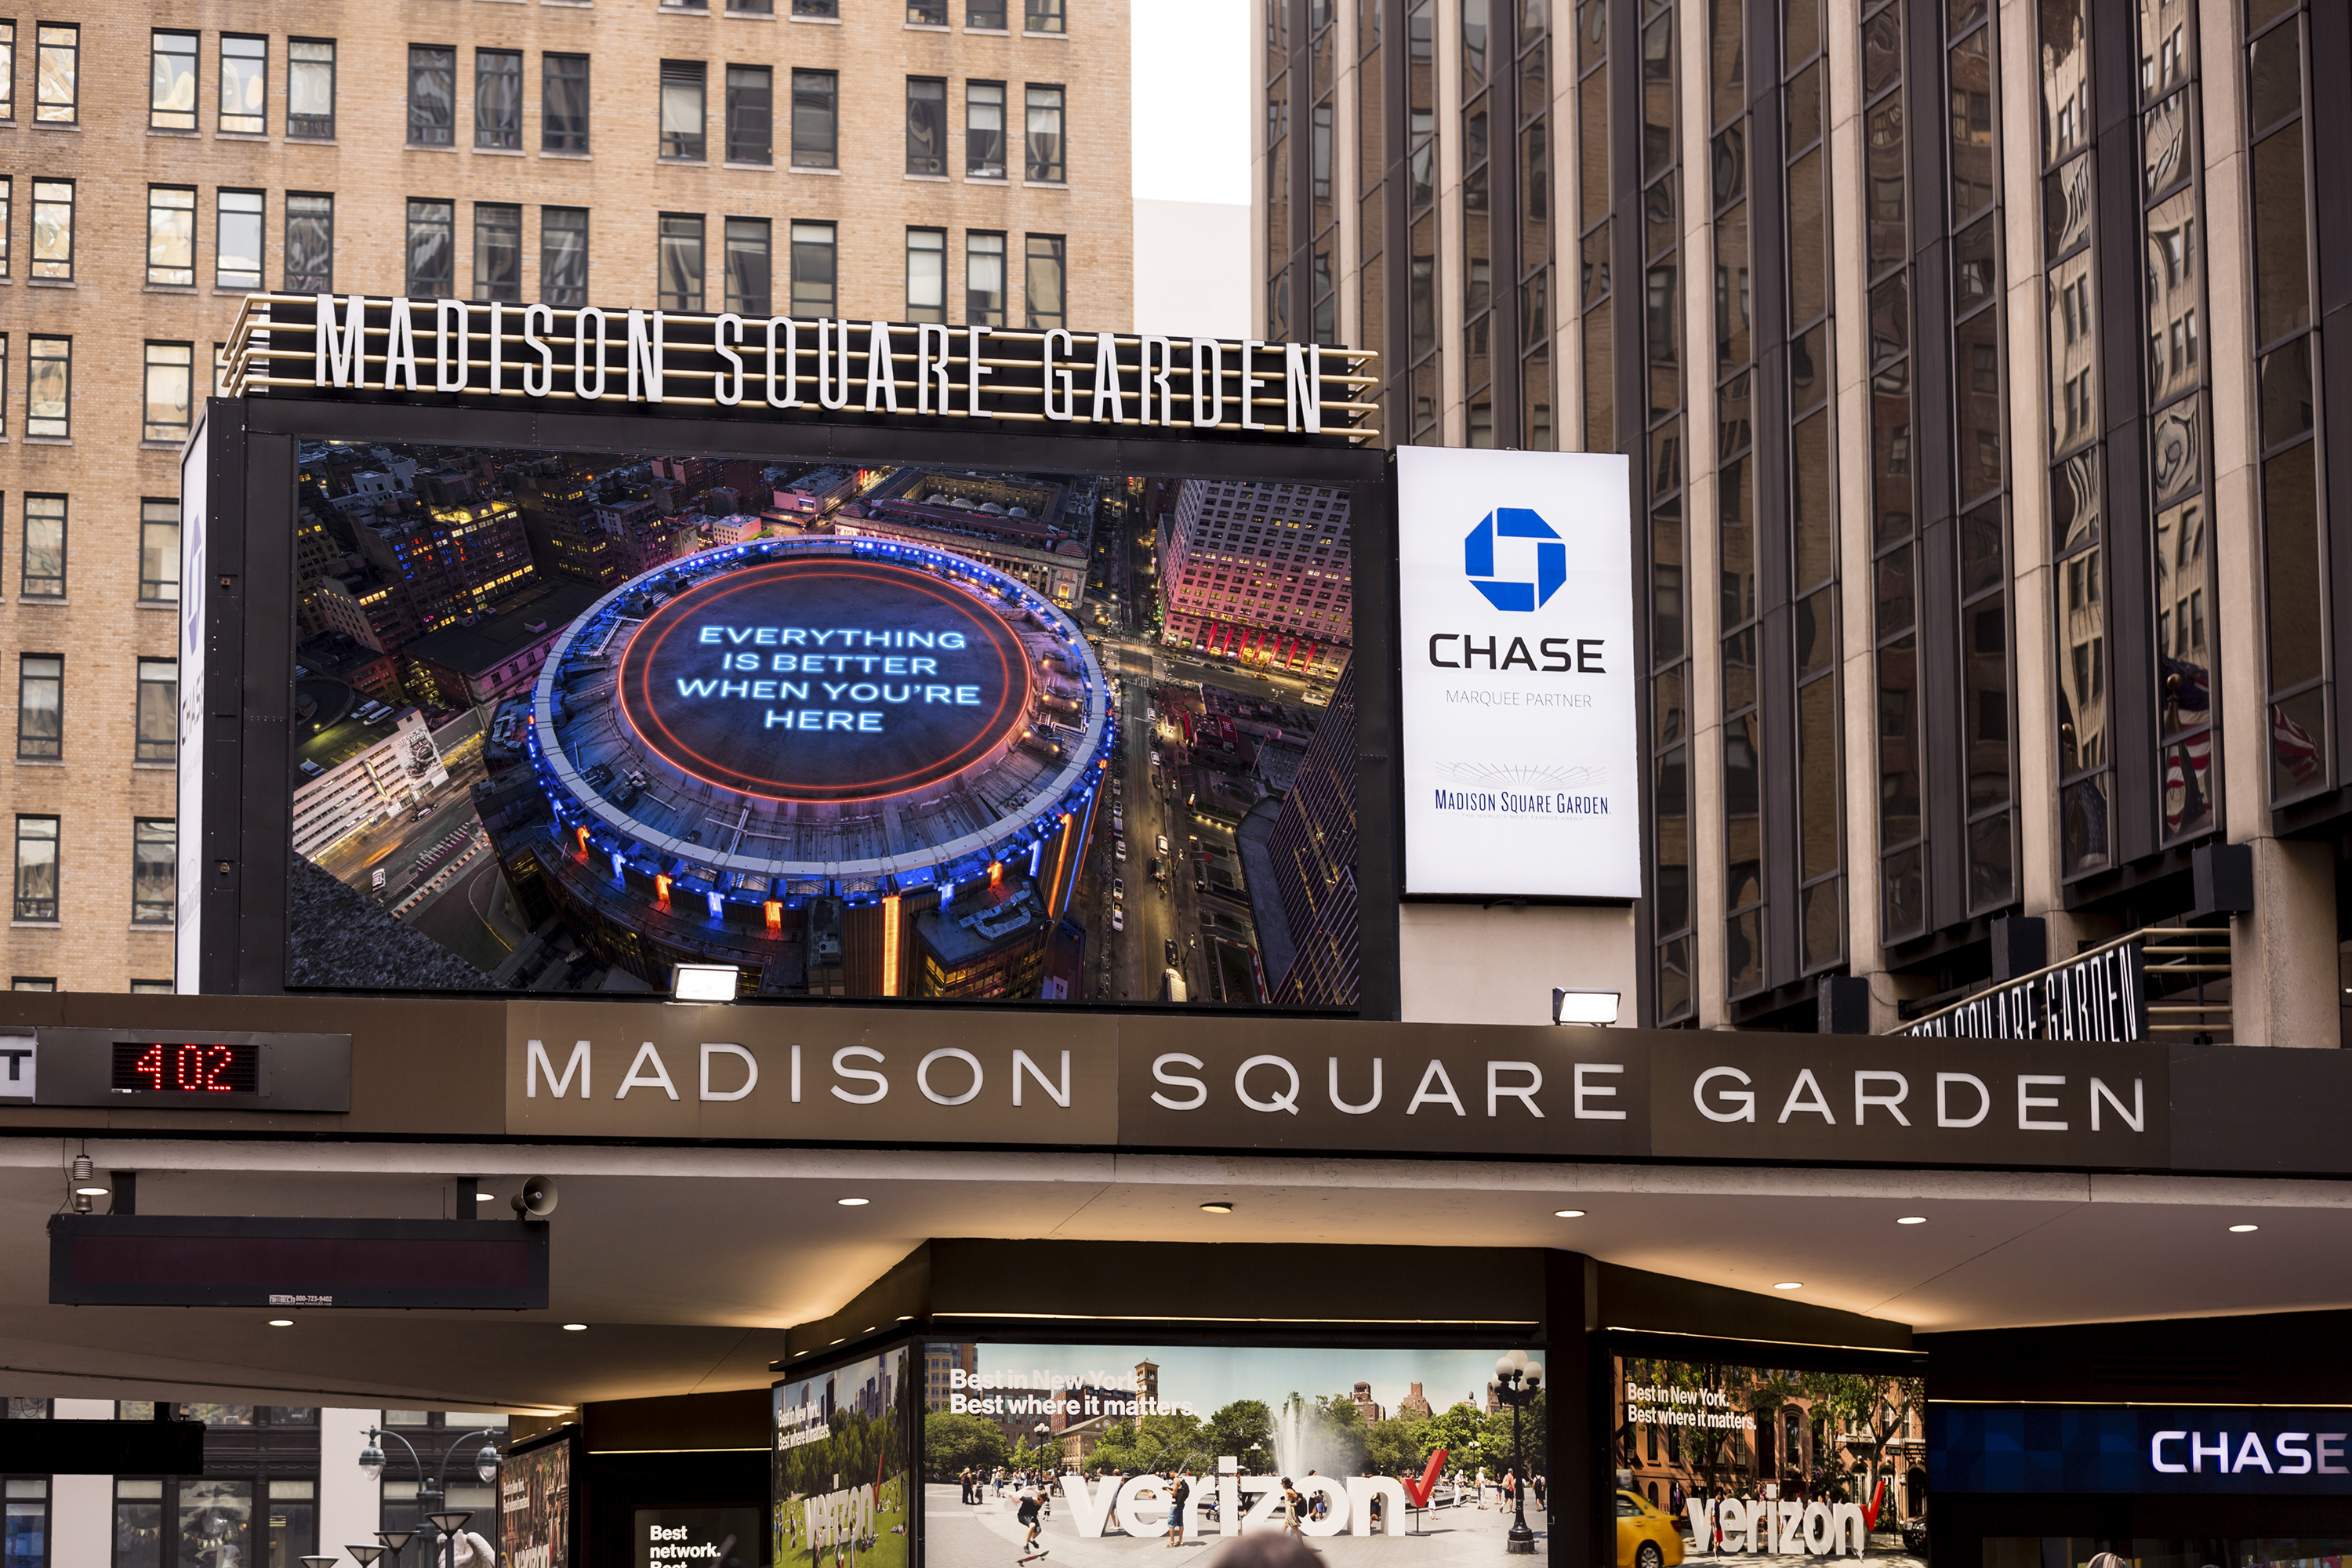 New York Knicks And New York Rangers Join Together To Welcome Fans Back To Madison Square Garden Business Wire